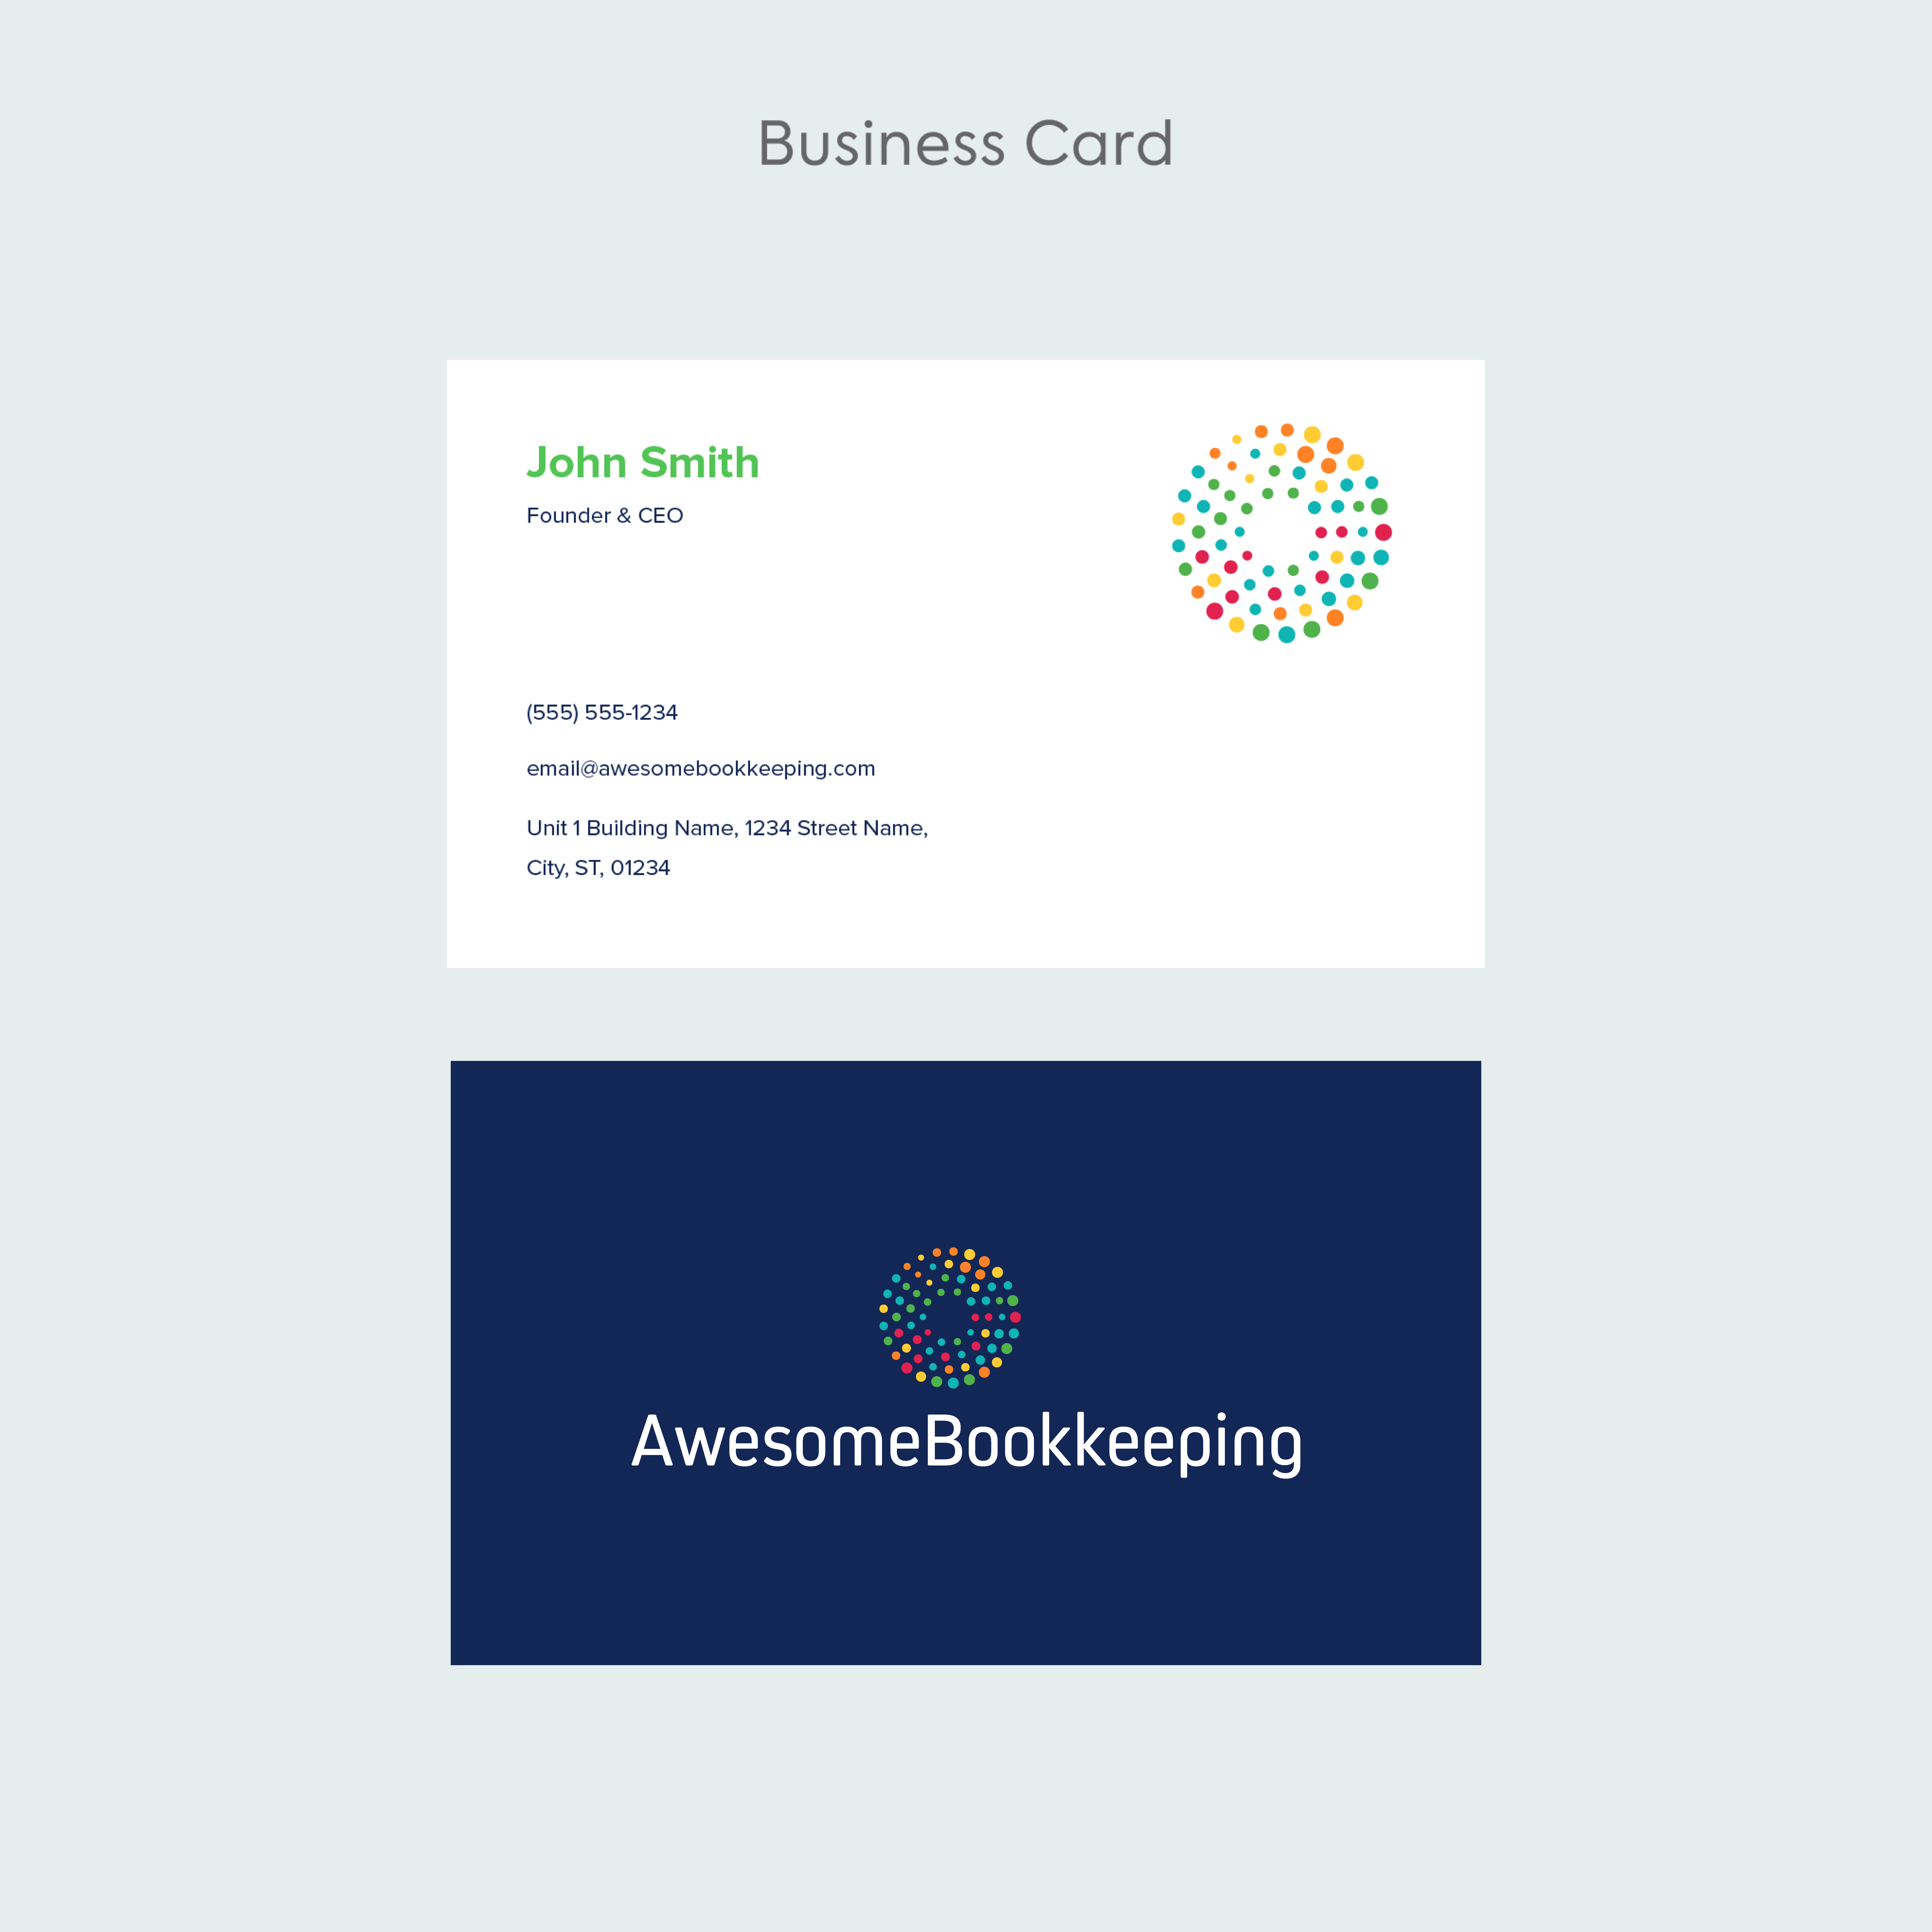 04 - Business Card Template